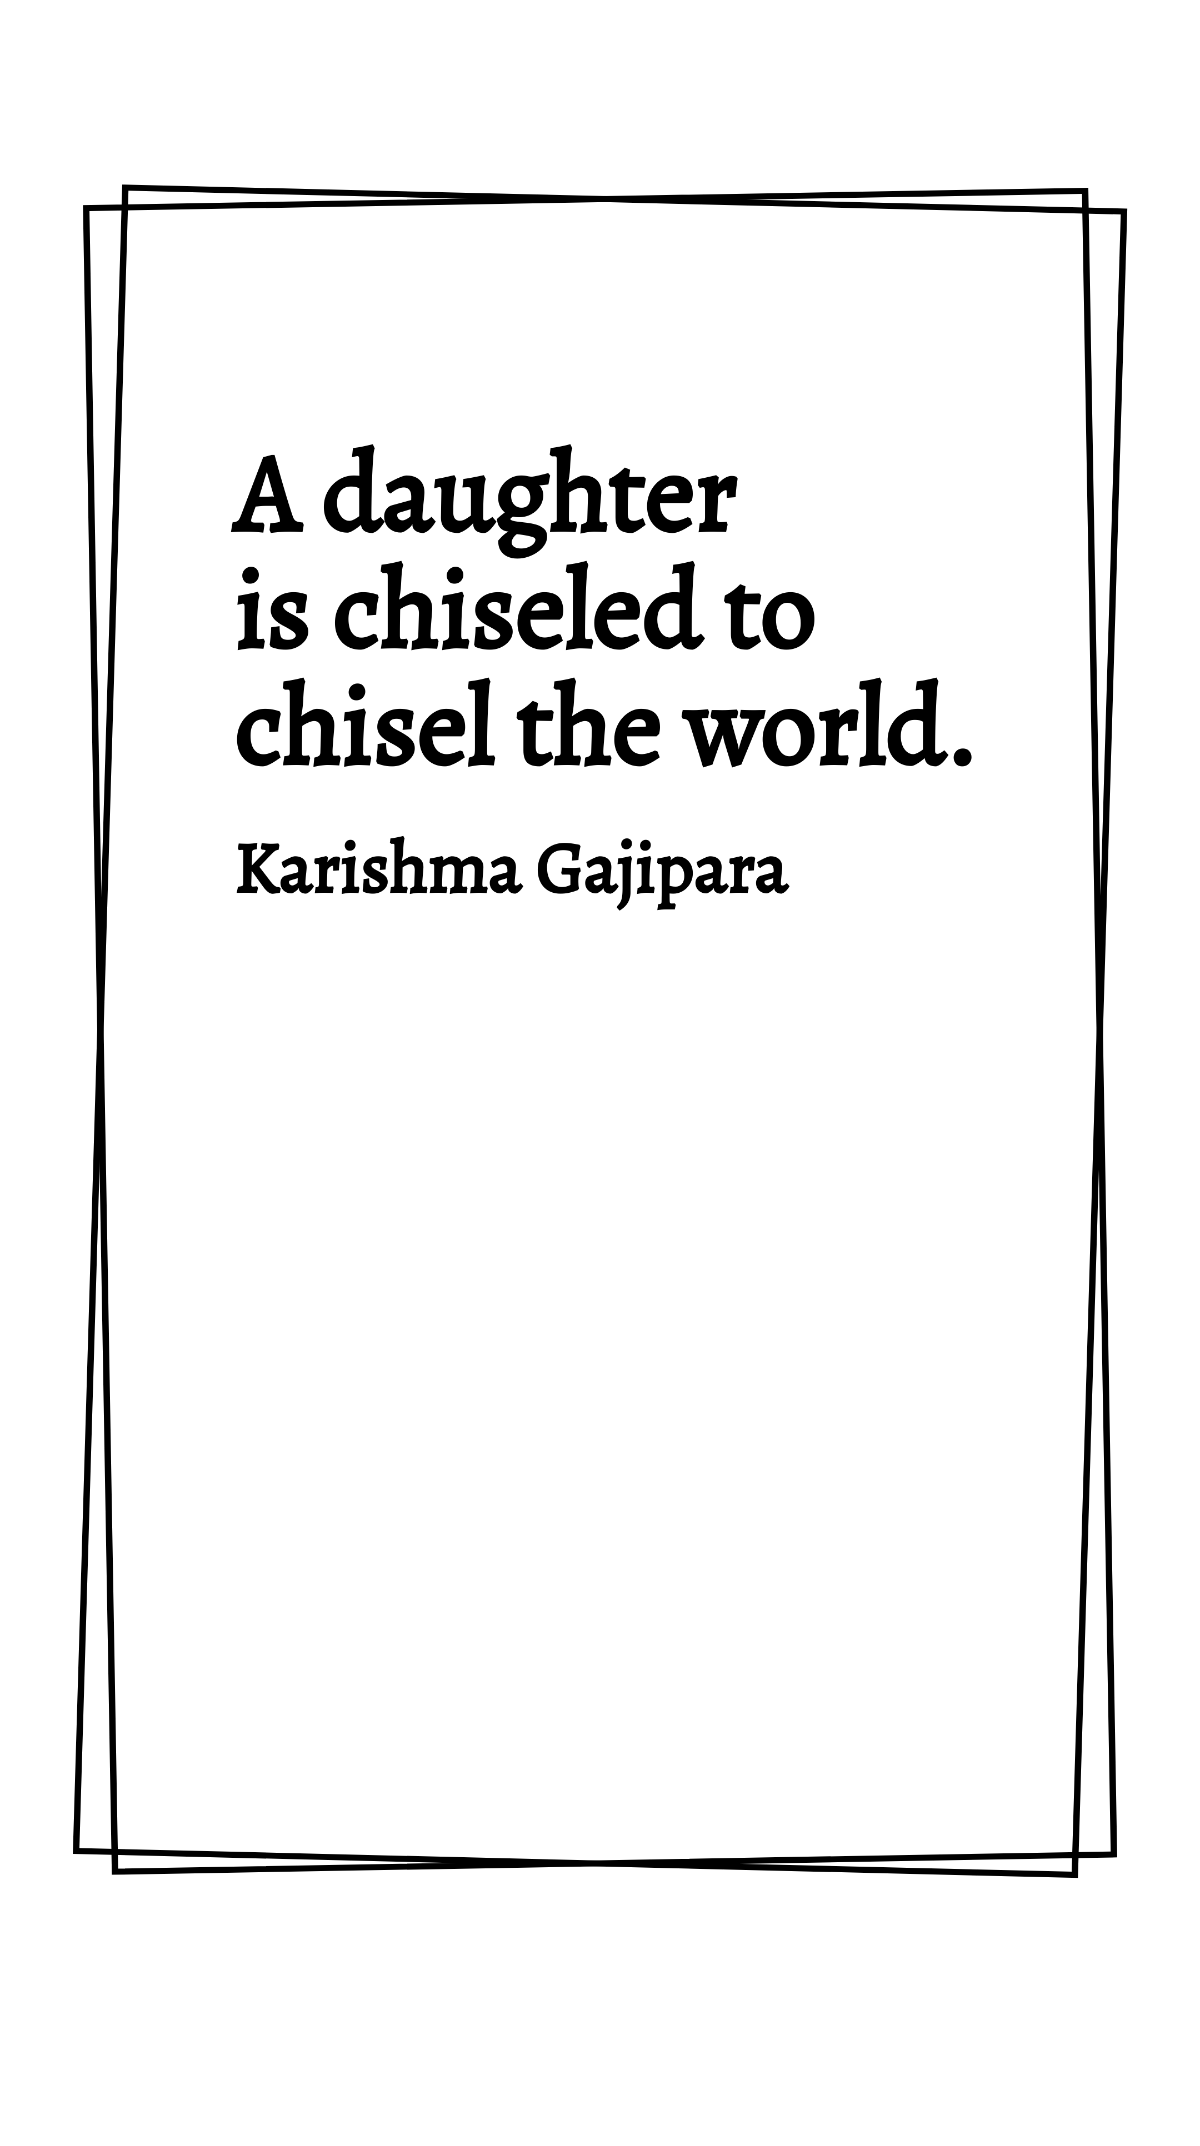 Karishma Gajipara - A daughter is chiseled to chisel the world. Template